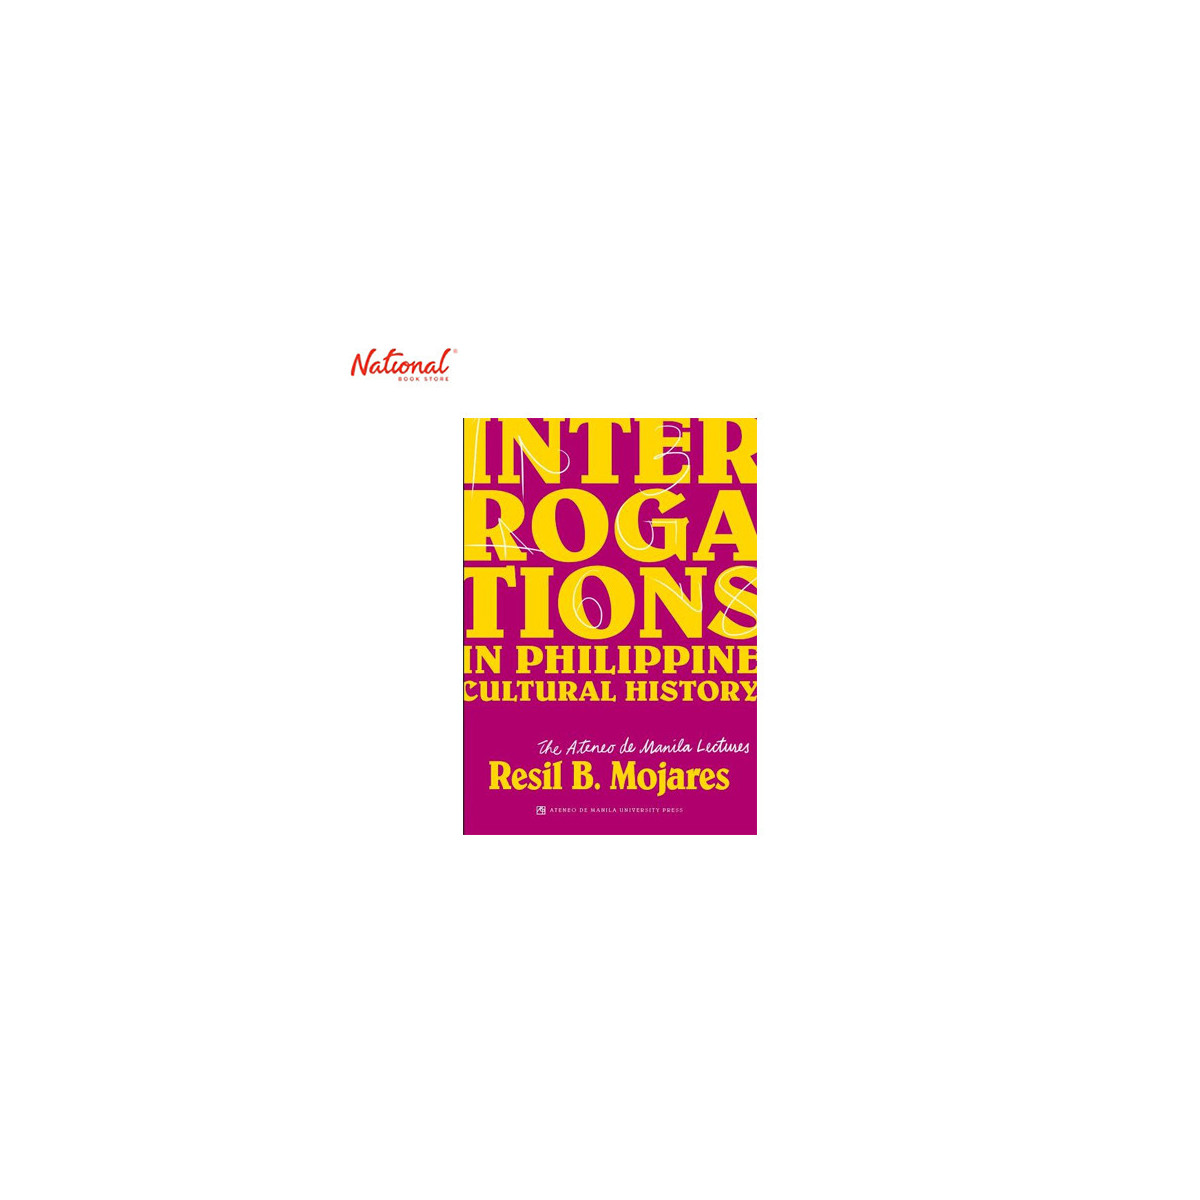 INTERROGATIONS IN PHILIPPINE CULTURAL HISTORY TRADE PAPERBACK